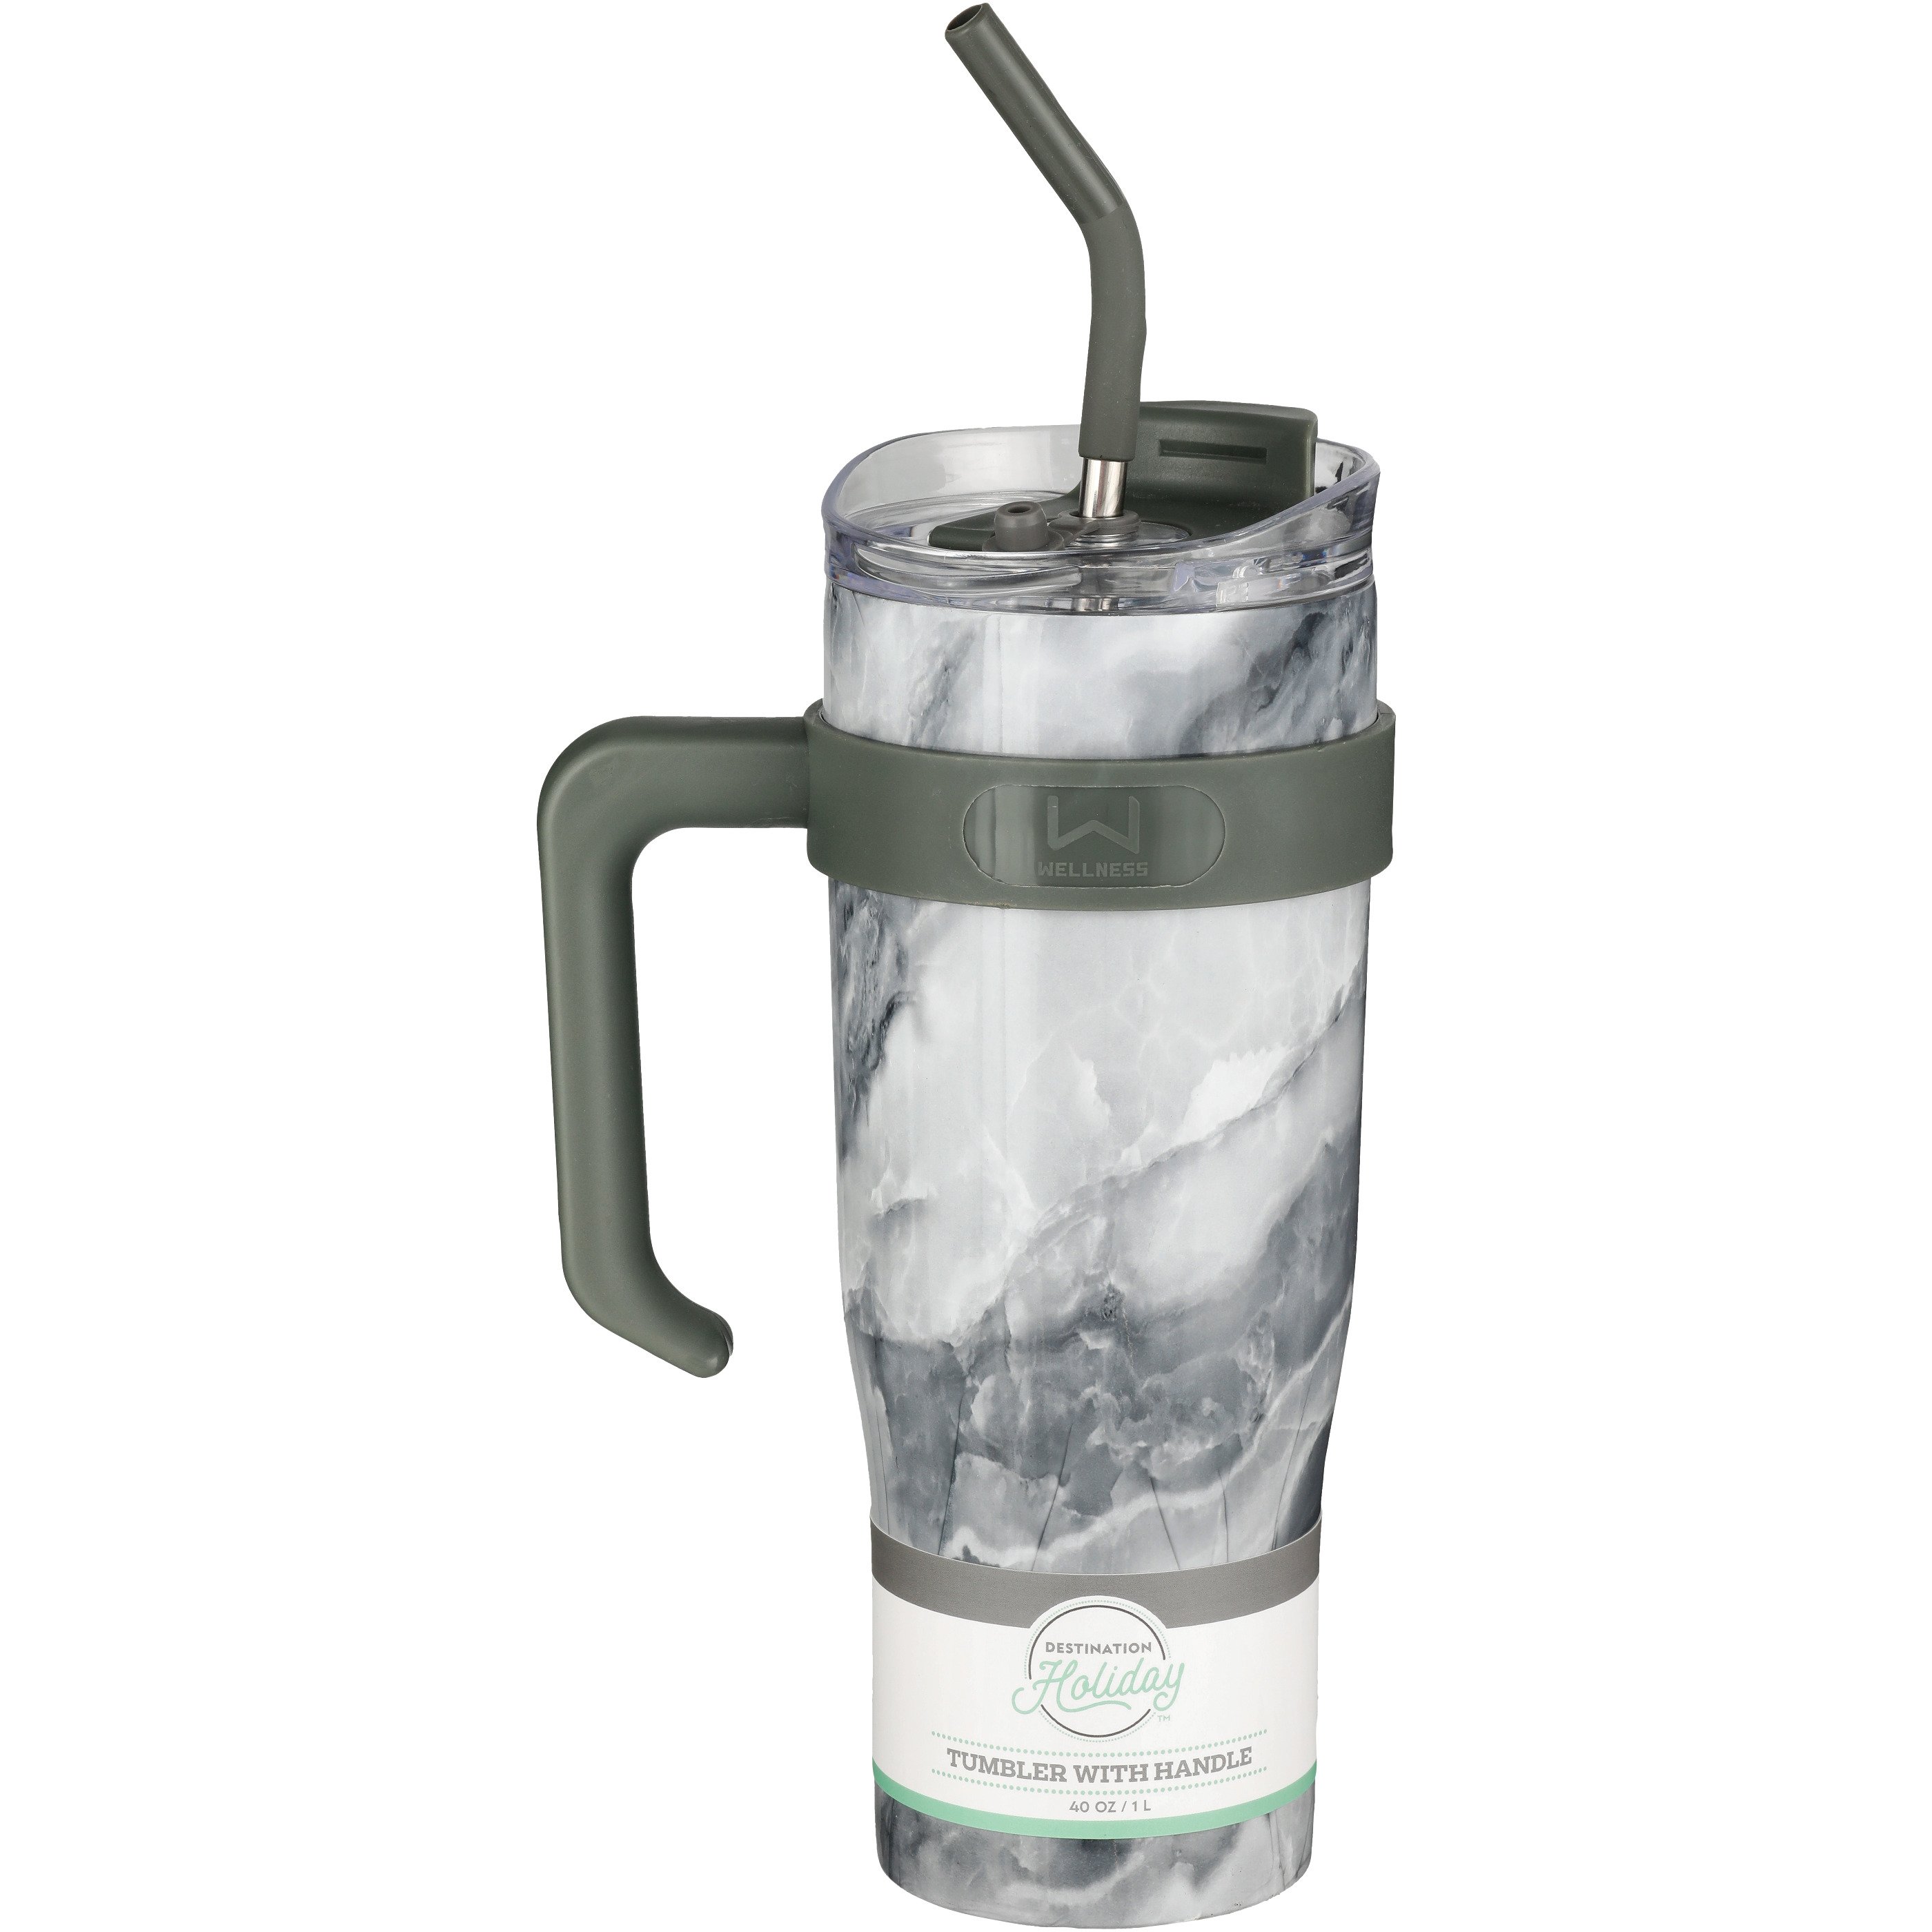 Destination Holiday Tumbler with Handle & Straw - Black Marble